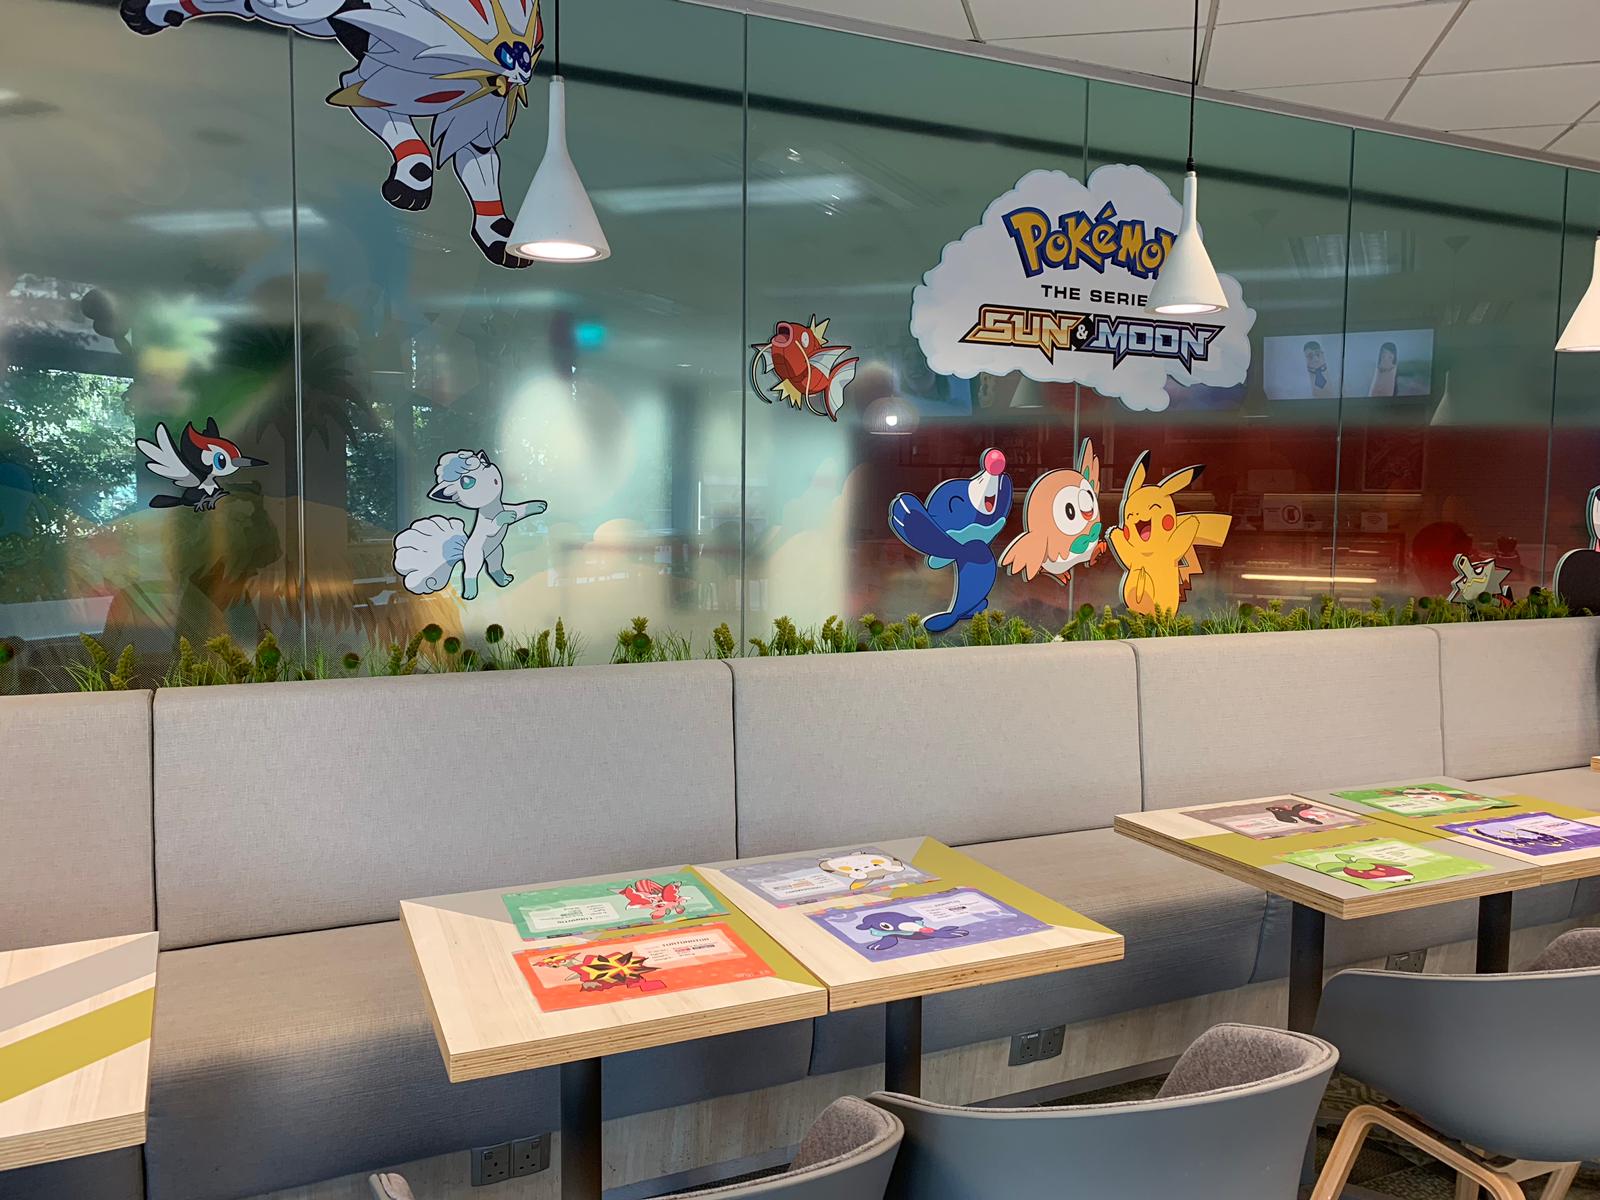 Pokemon Themed Cafe Opens In Tampines And Jurong Meet And Greet Pikachu Around Spore Till Mar